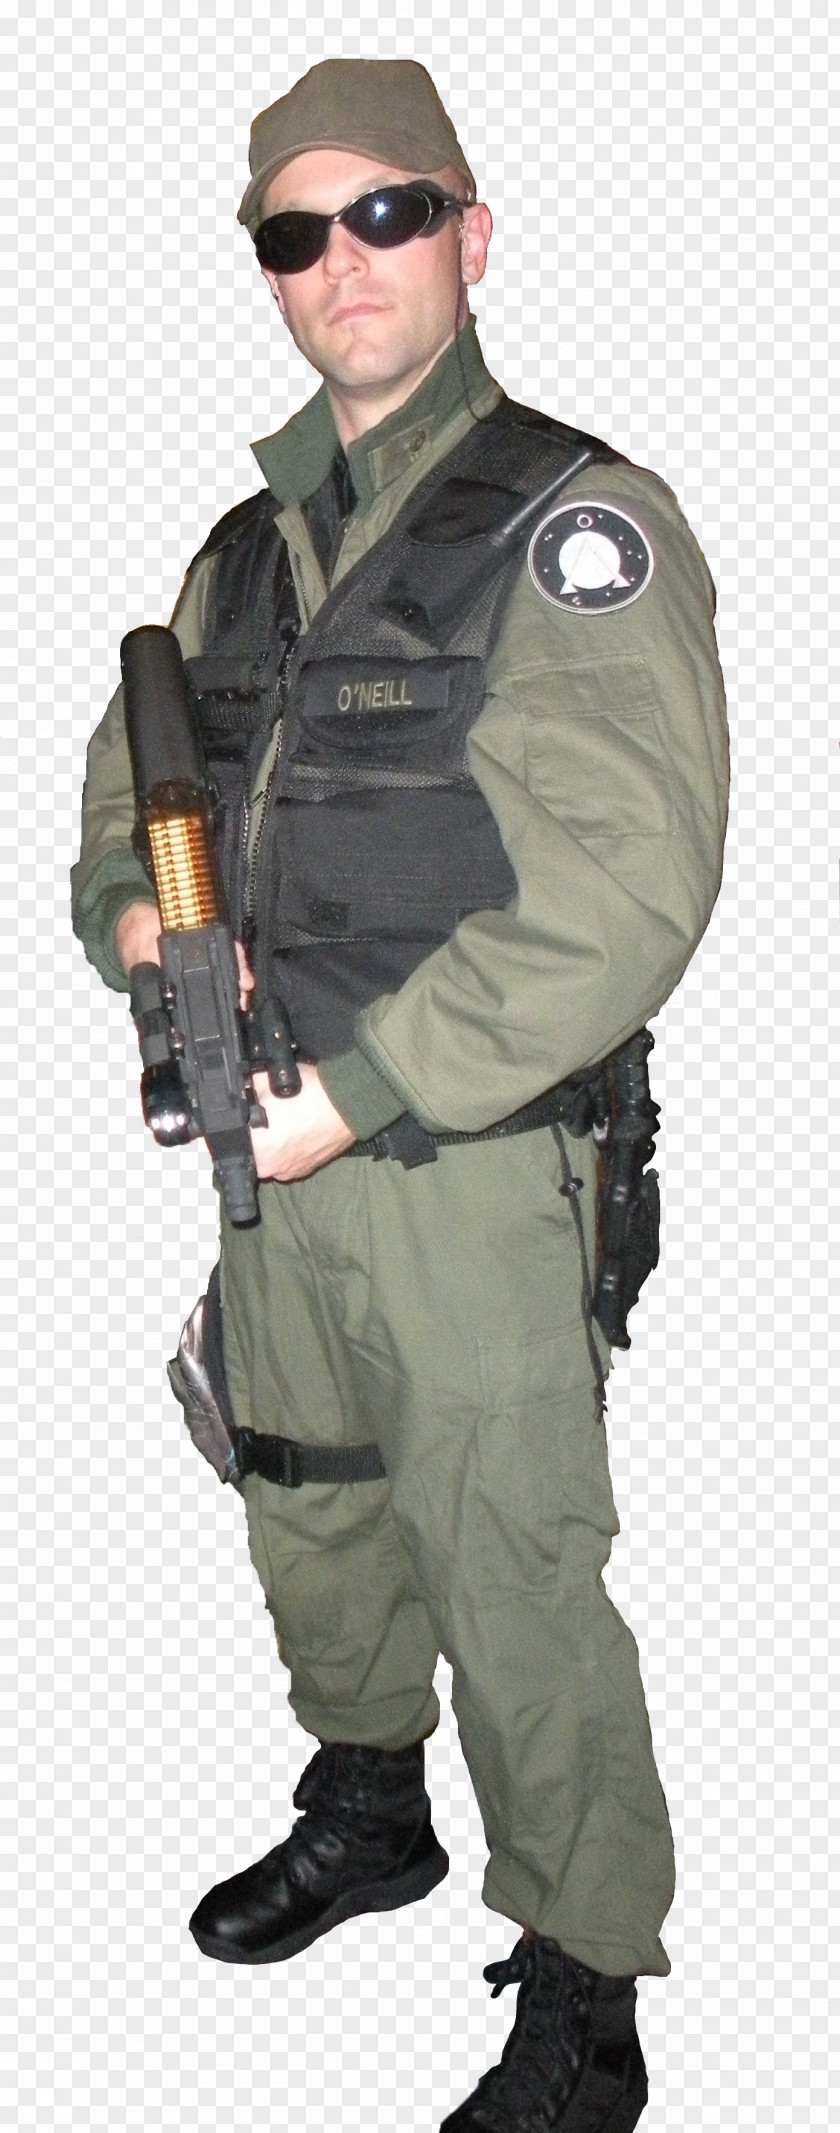 Cosplay Jack O'Neill Stargate SG-1 Richard Dean Anderson Costume PNG